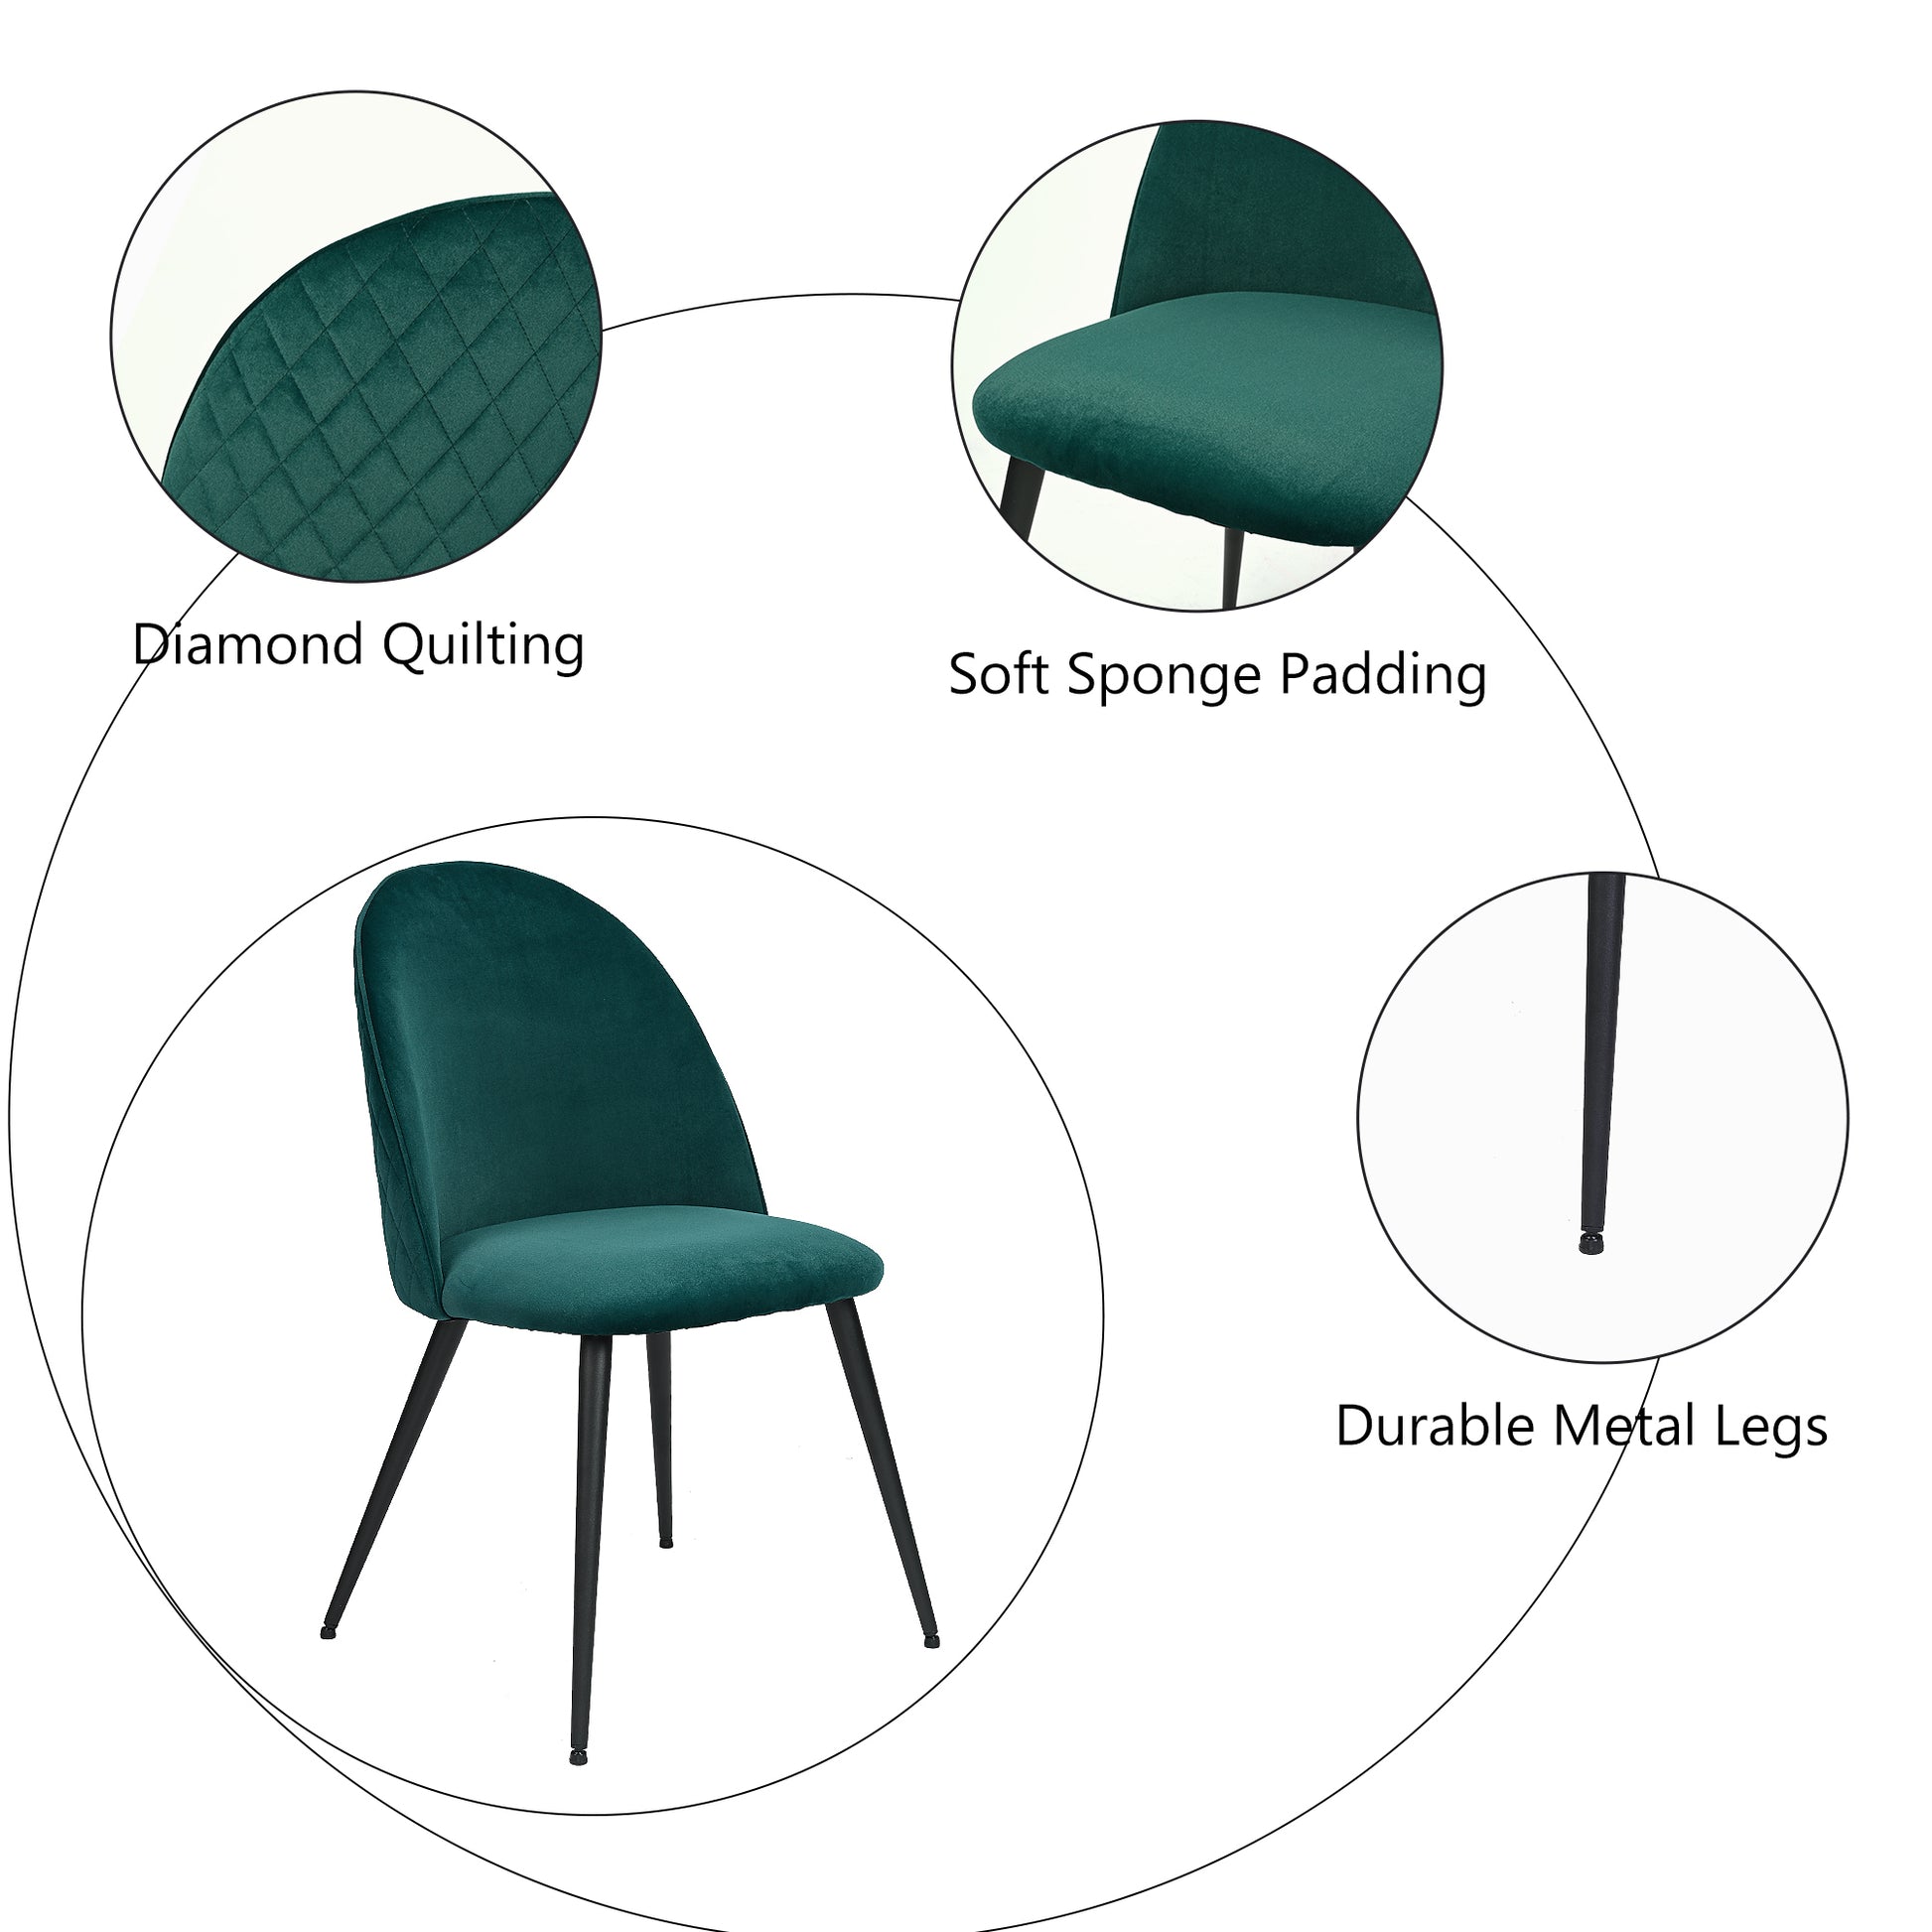 Green Velvet Dining Chair with Black Metal Legs - Set of 2 or 4